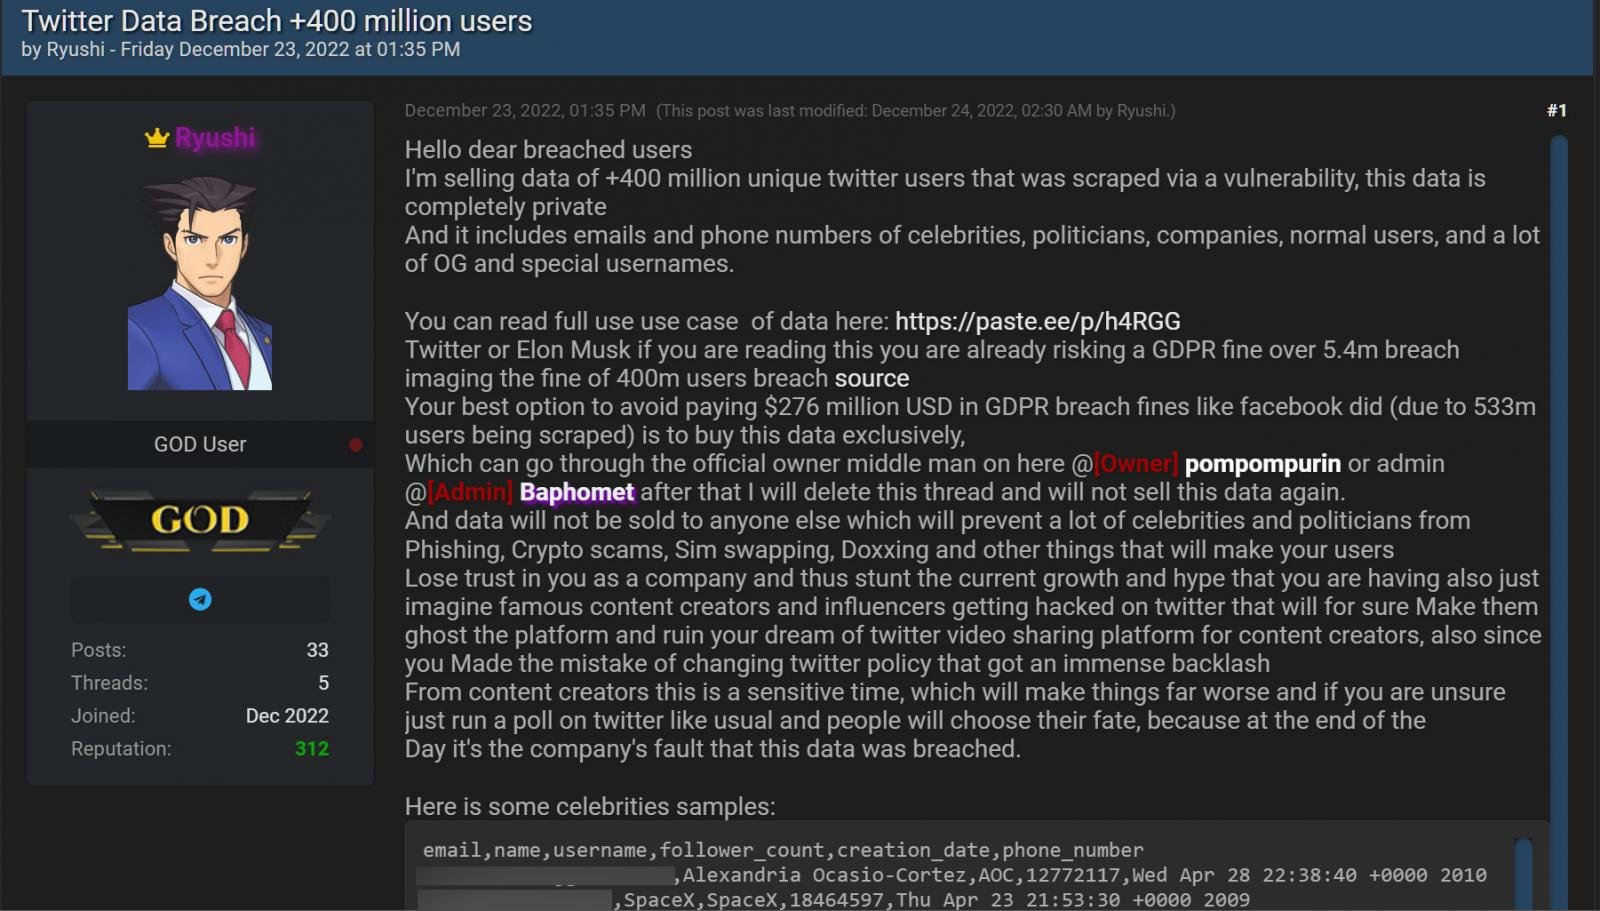 Forum post selling the data for an alleged 400 million Twitter users